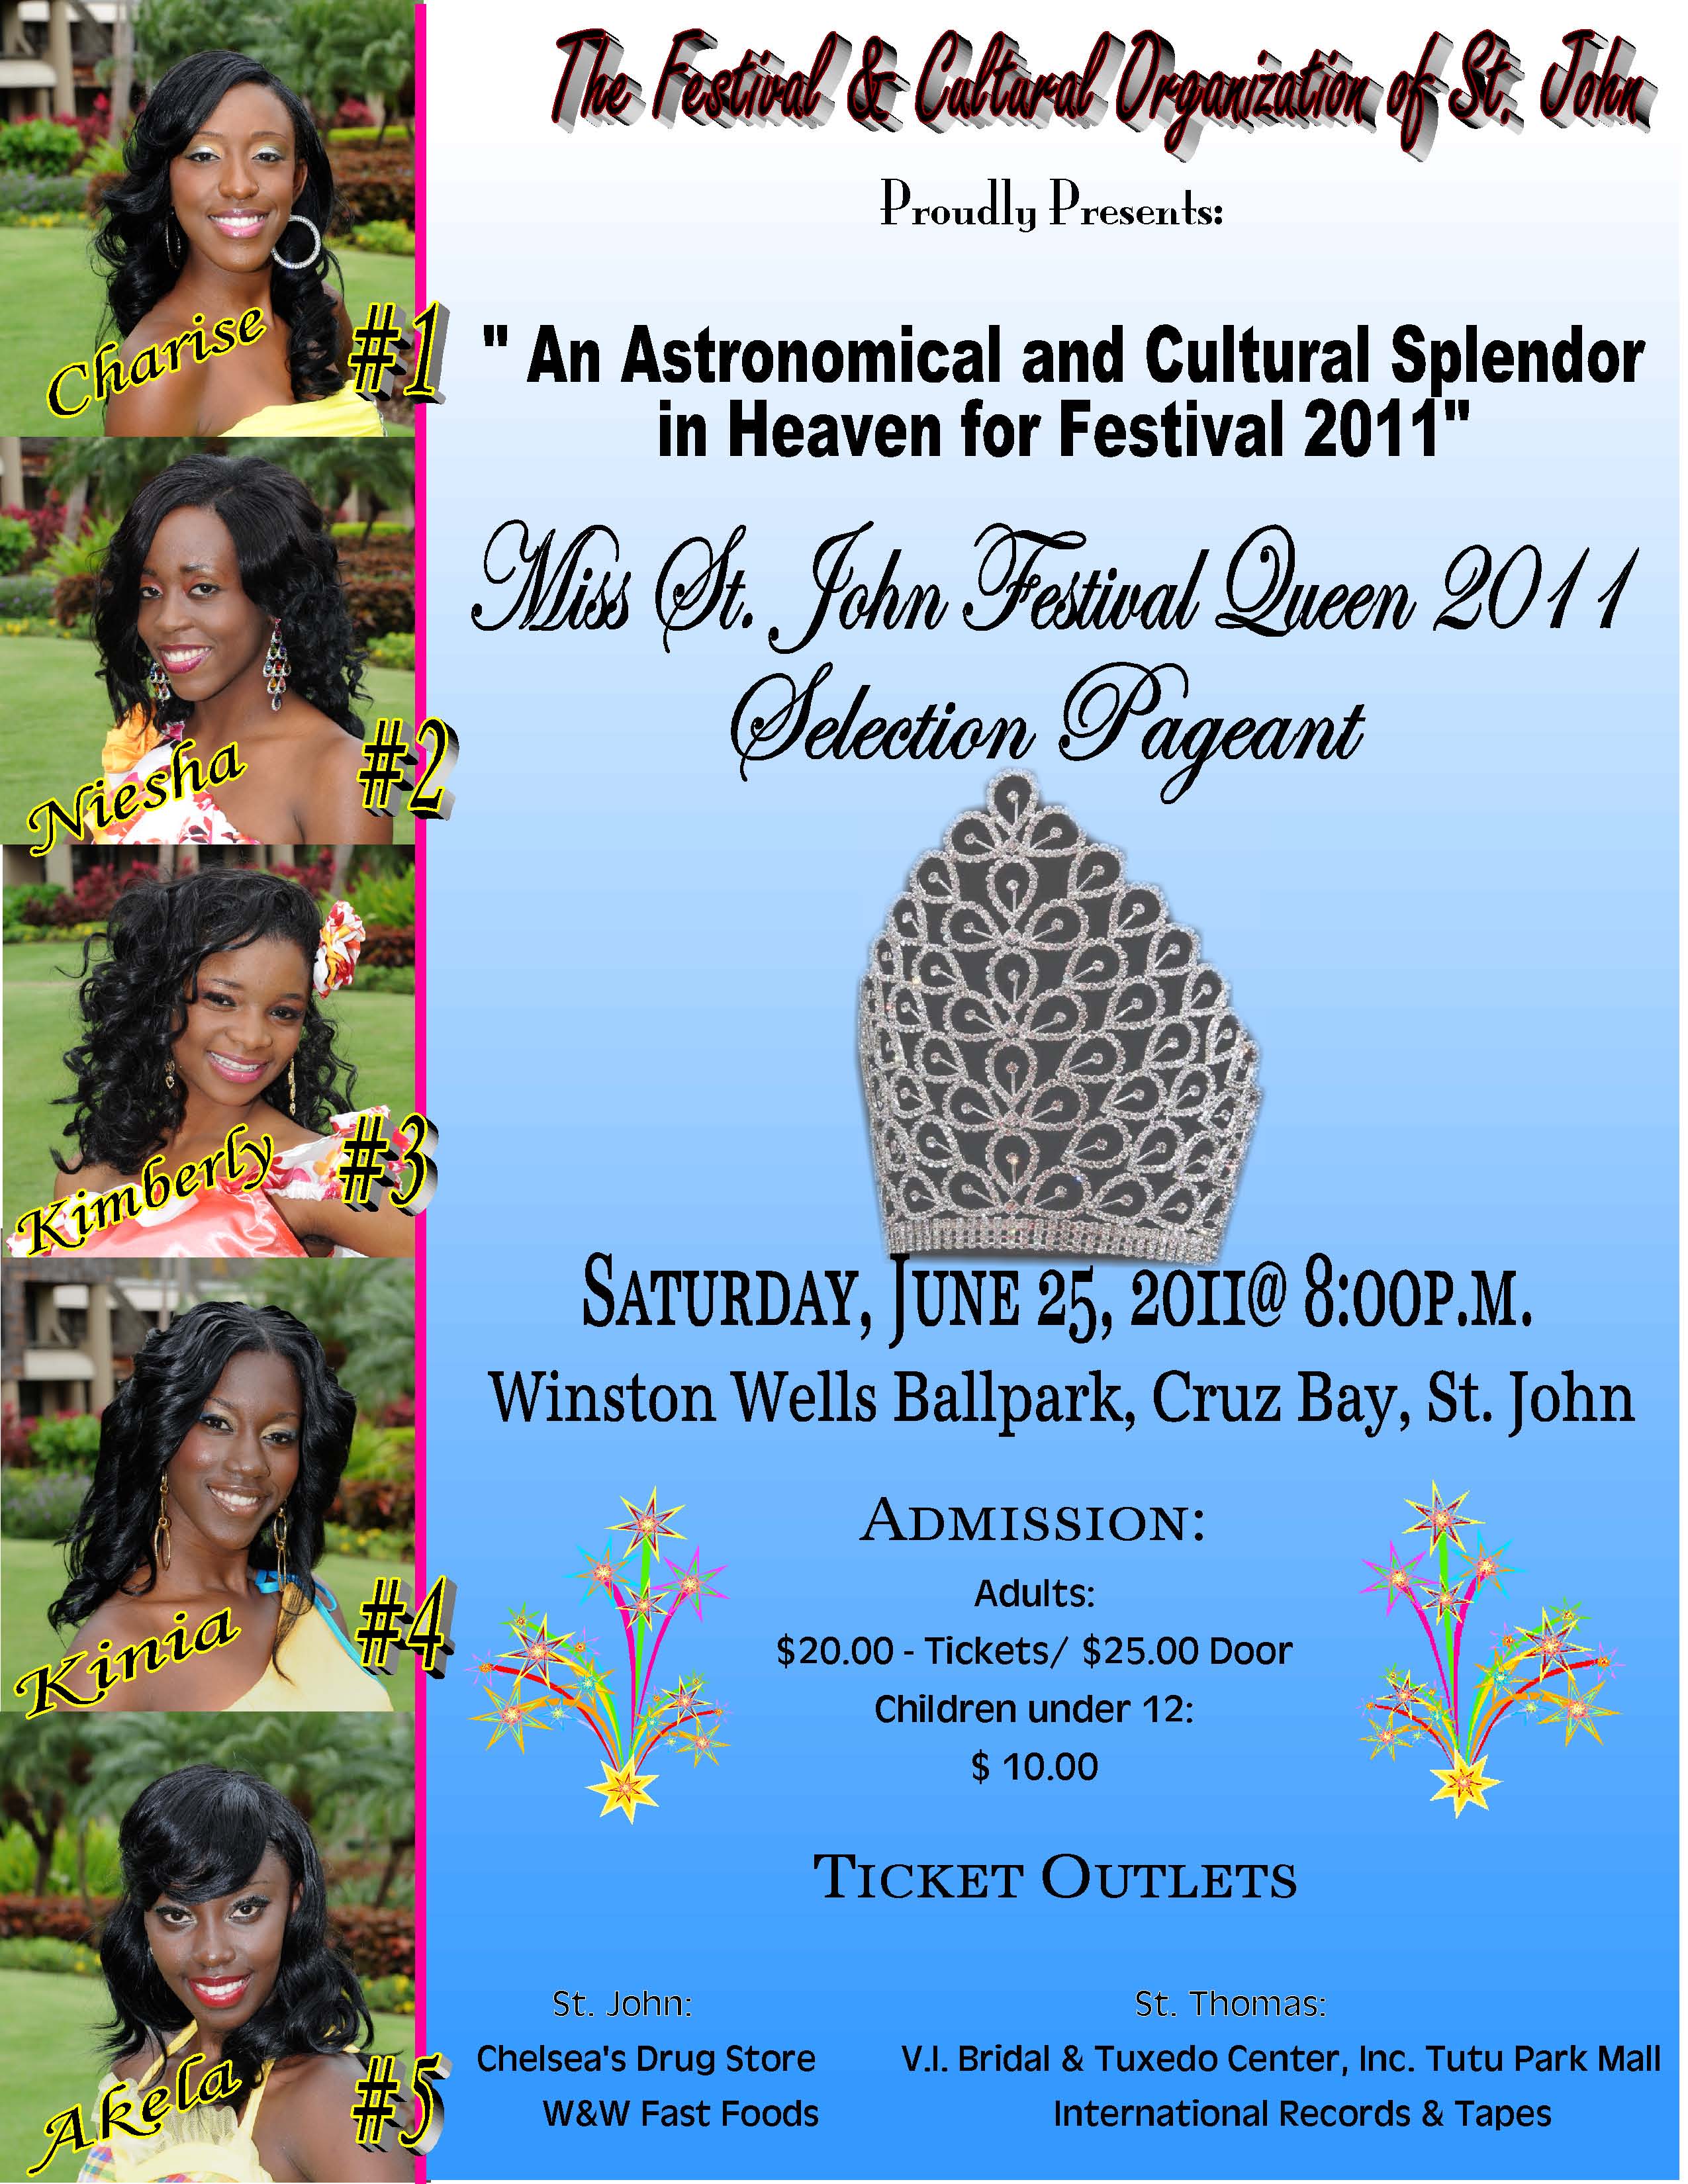 The Festival Queen Pageant is set for June 25.